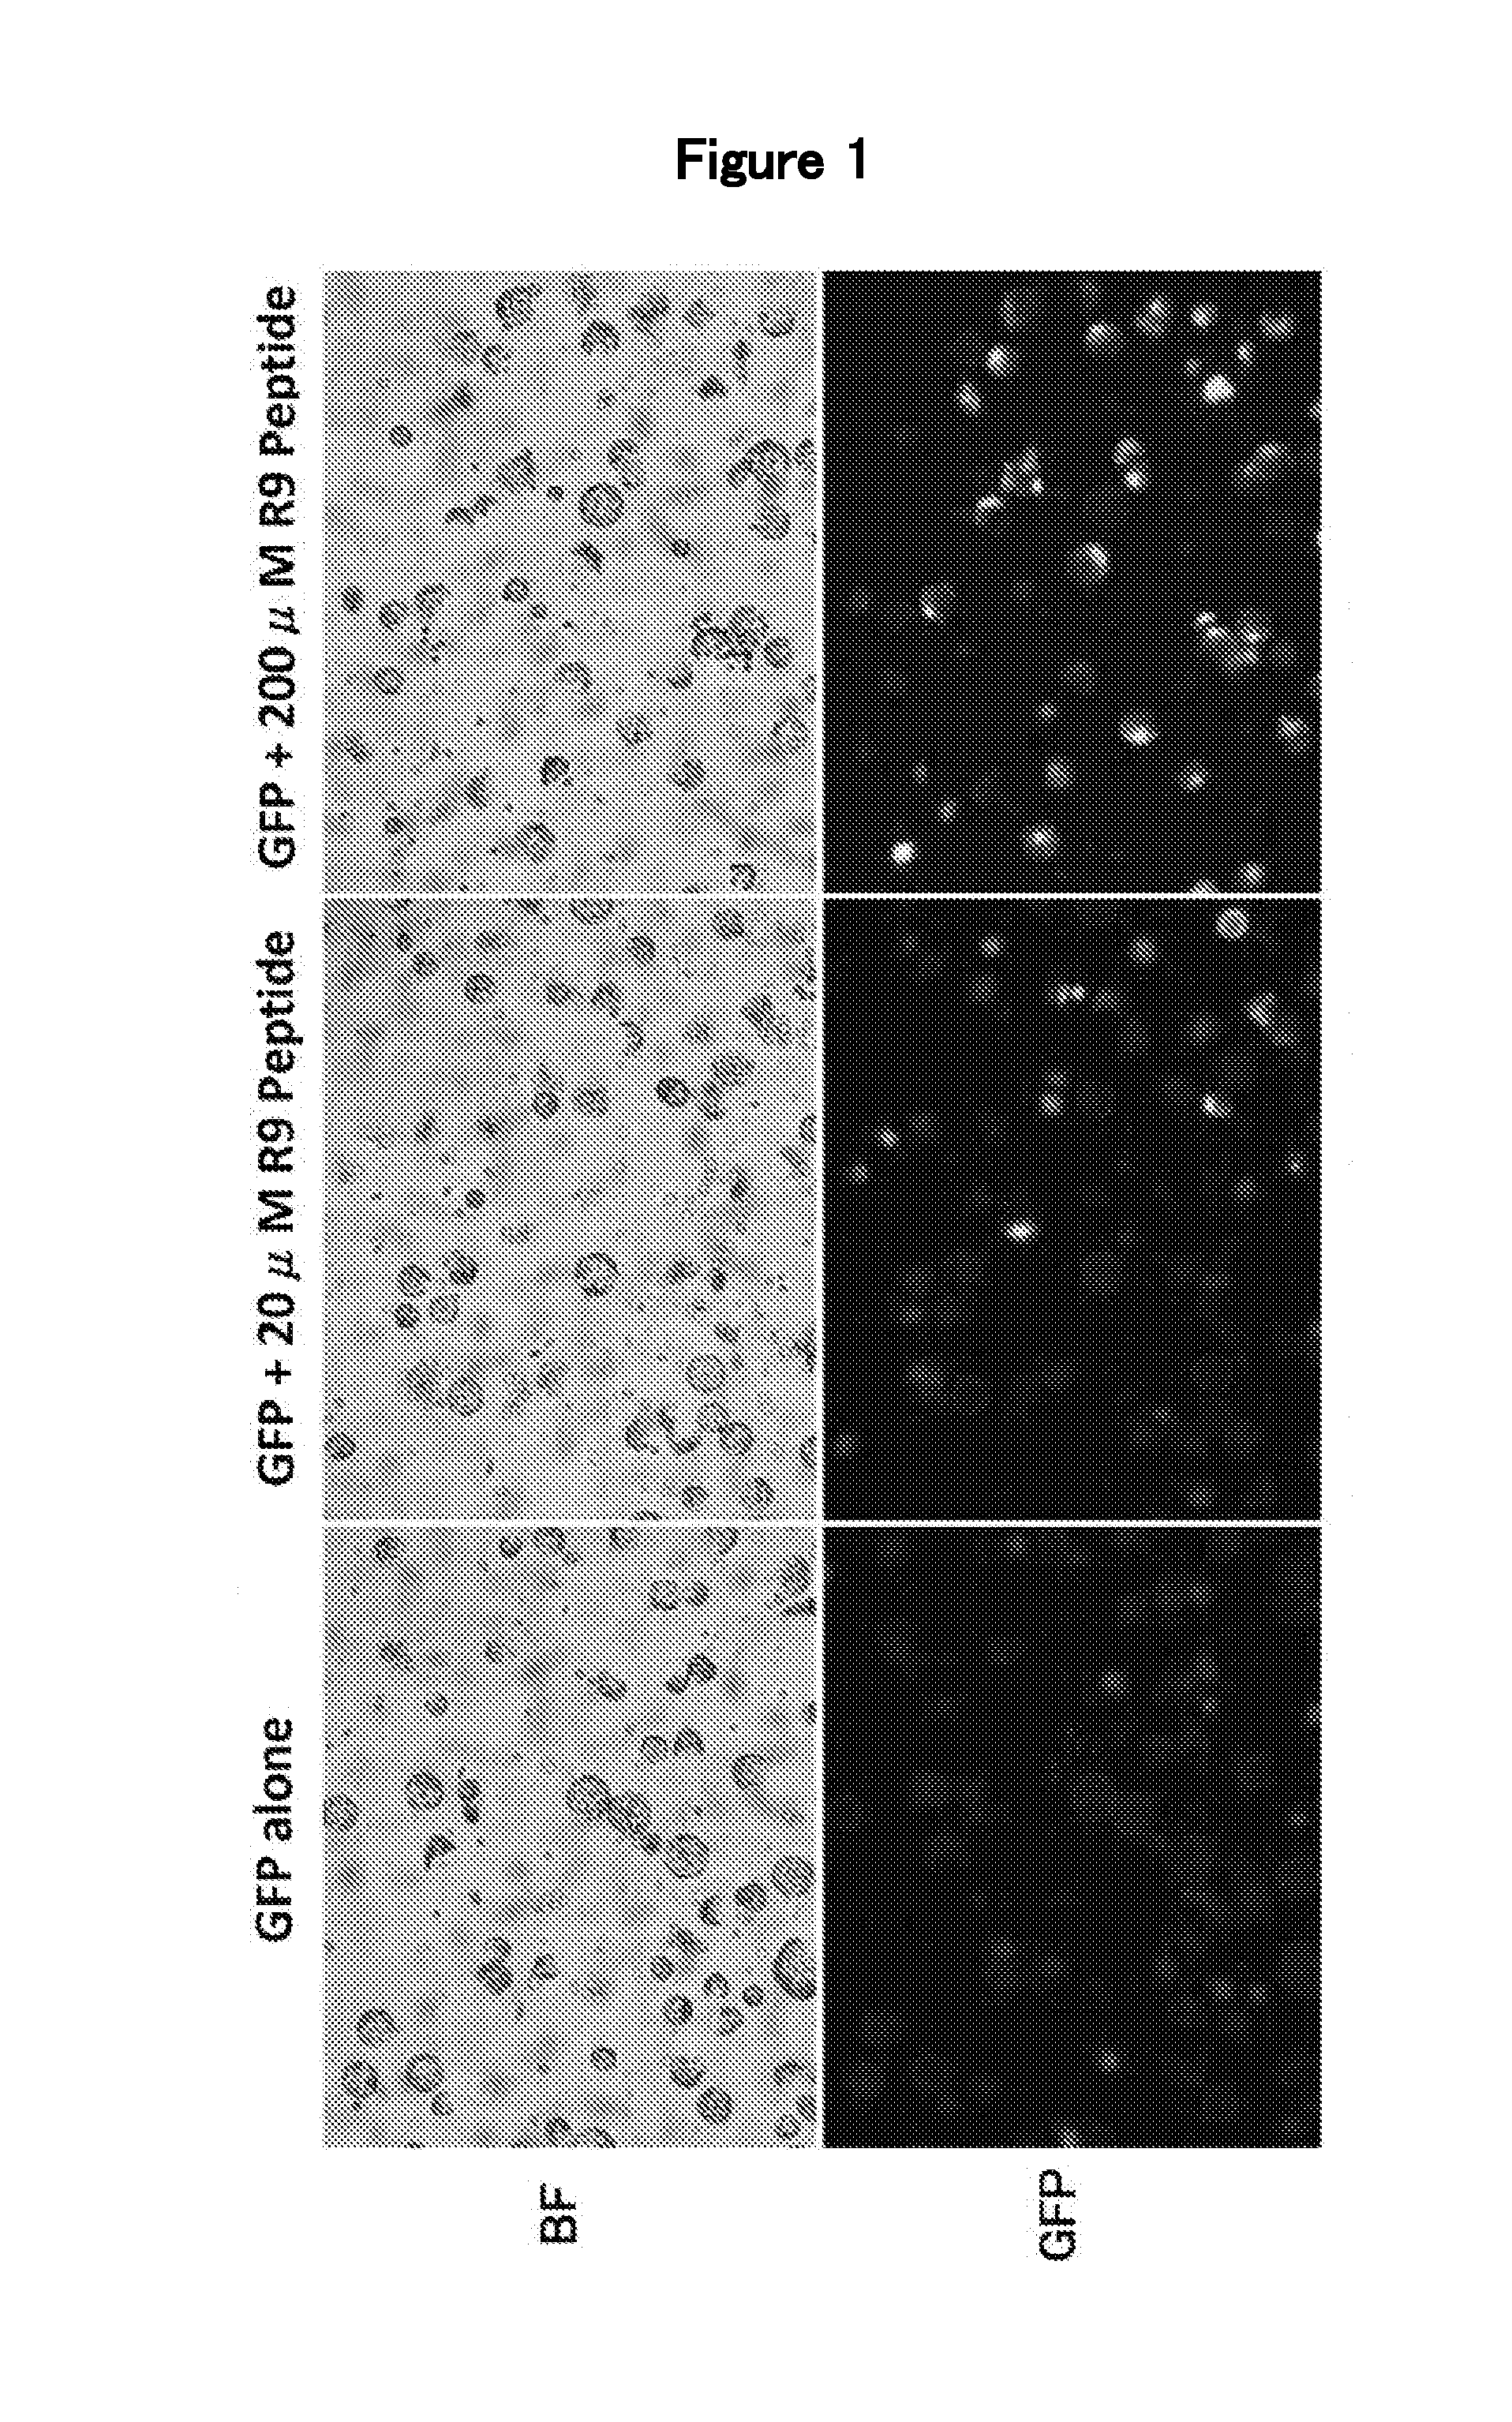 Treating agent for plant cell walls, substance delivery method using treating agent, and substance delivery system